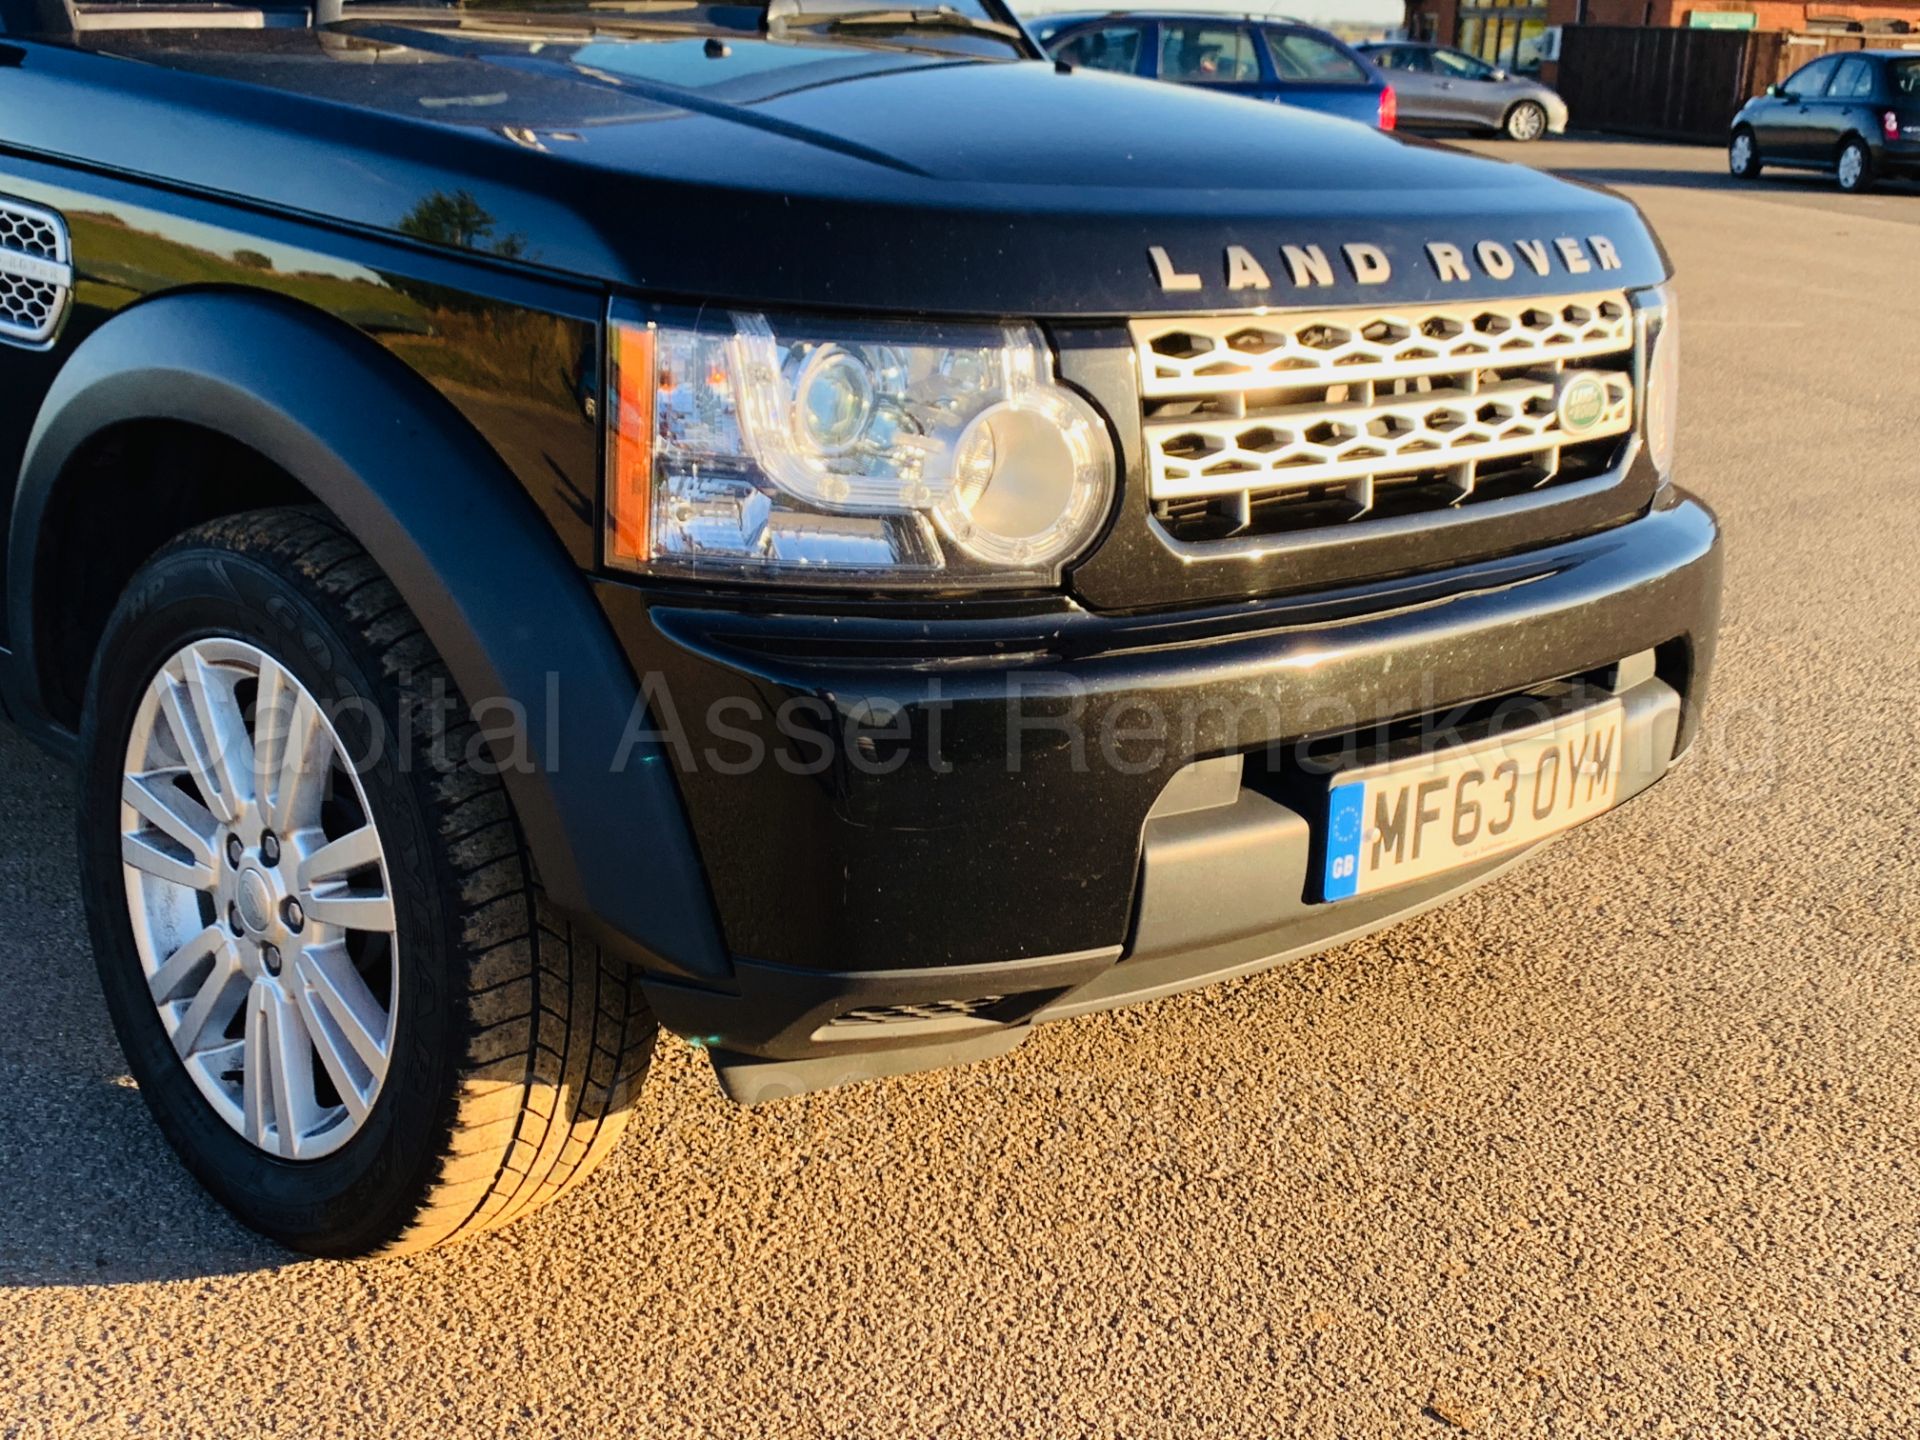 LAND ROVER DISCOVERY 4 **COMMERCIAL** (2014 MODEL) '3.0 SDV6 - 255 BHP - 8 SPEED AUTO' *HUGE SPEC* - Bild 13 aus 47